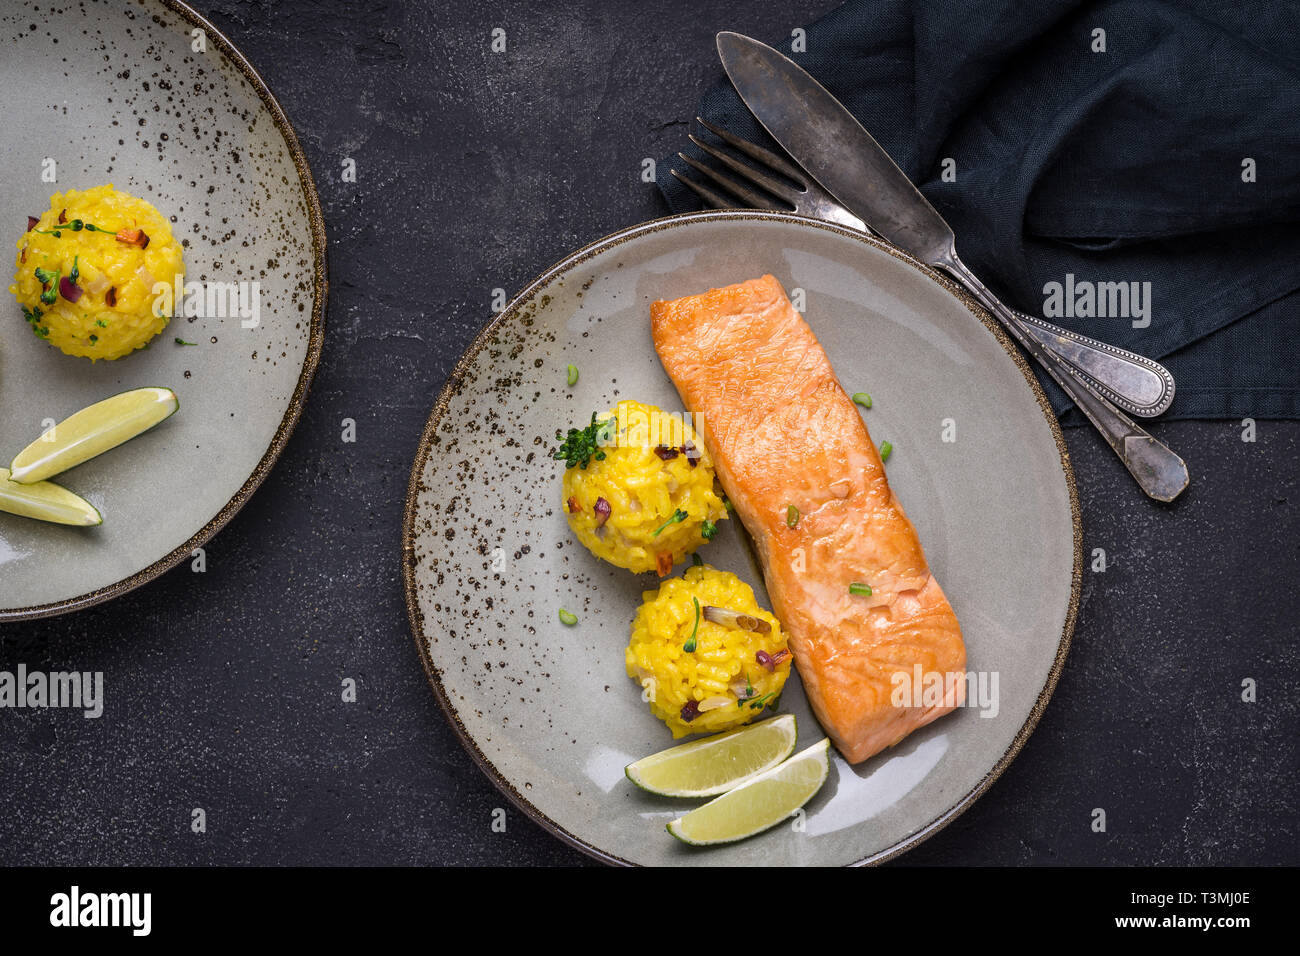 Grilled Salmon Fillet with Saffron Risotto on Dark Background Stock Photo